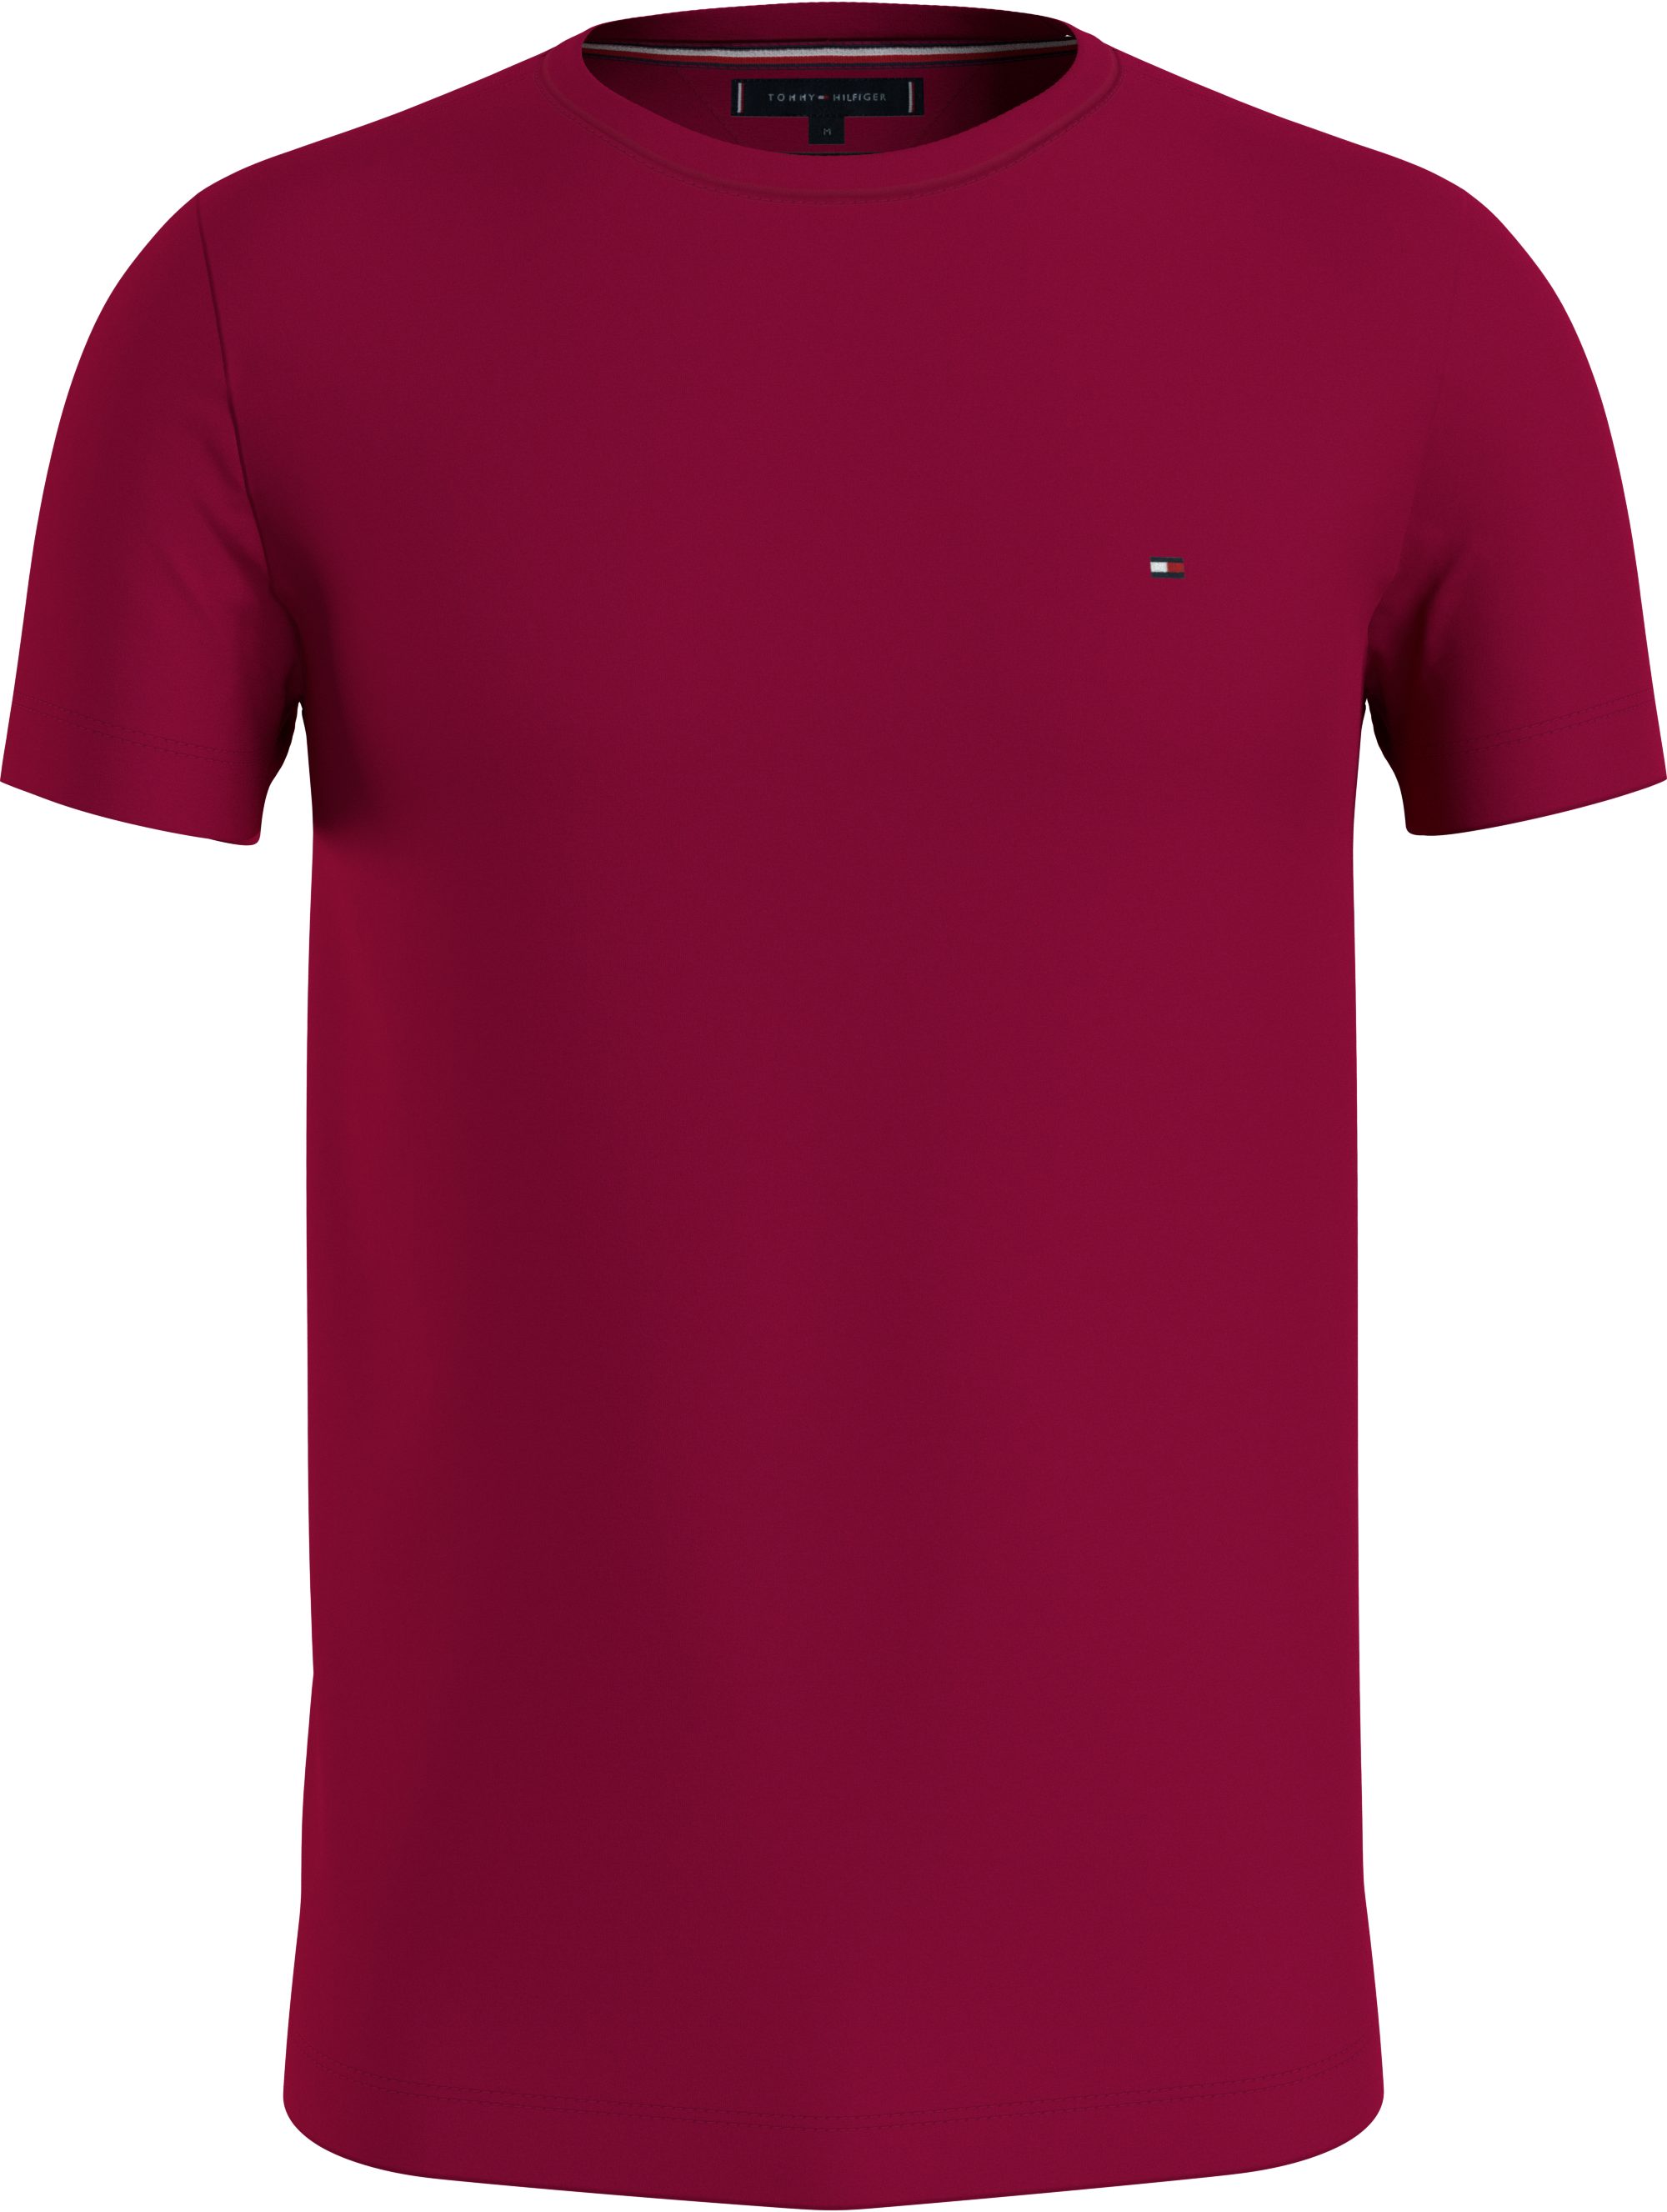 Tommy Hilfiger T-Shirt STRETCH SLIM Berry Royal FIT TEE